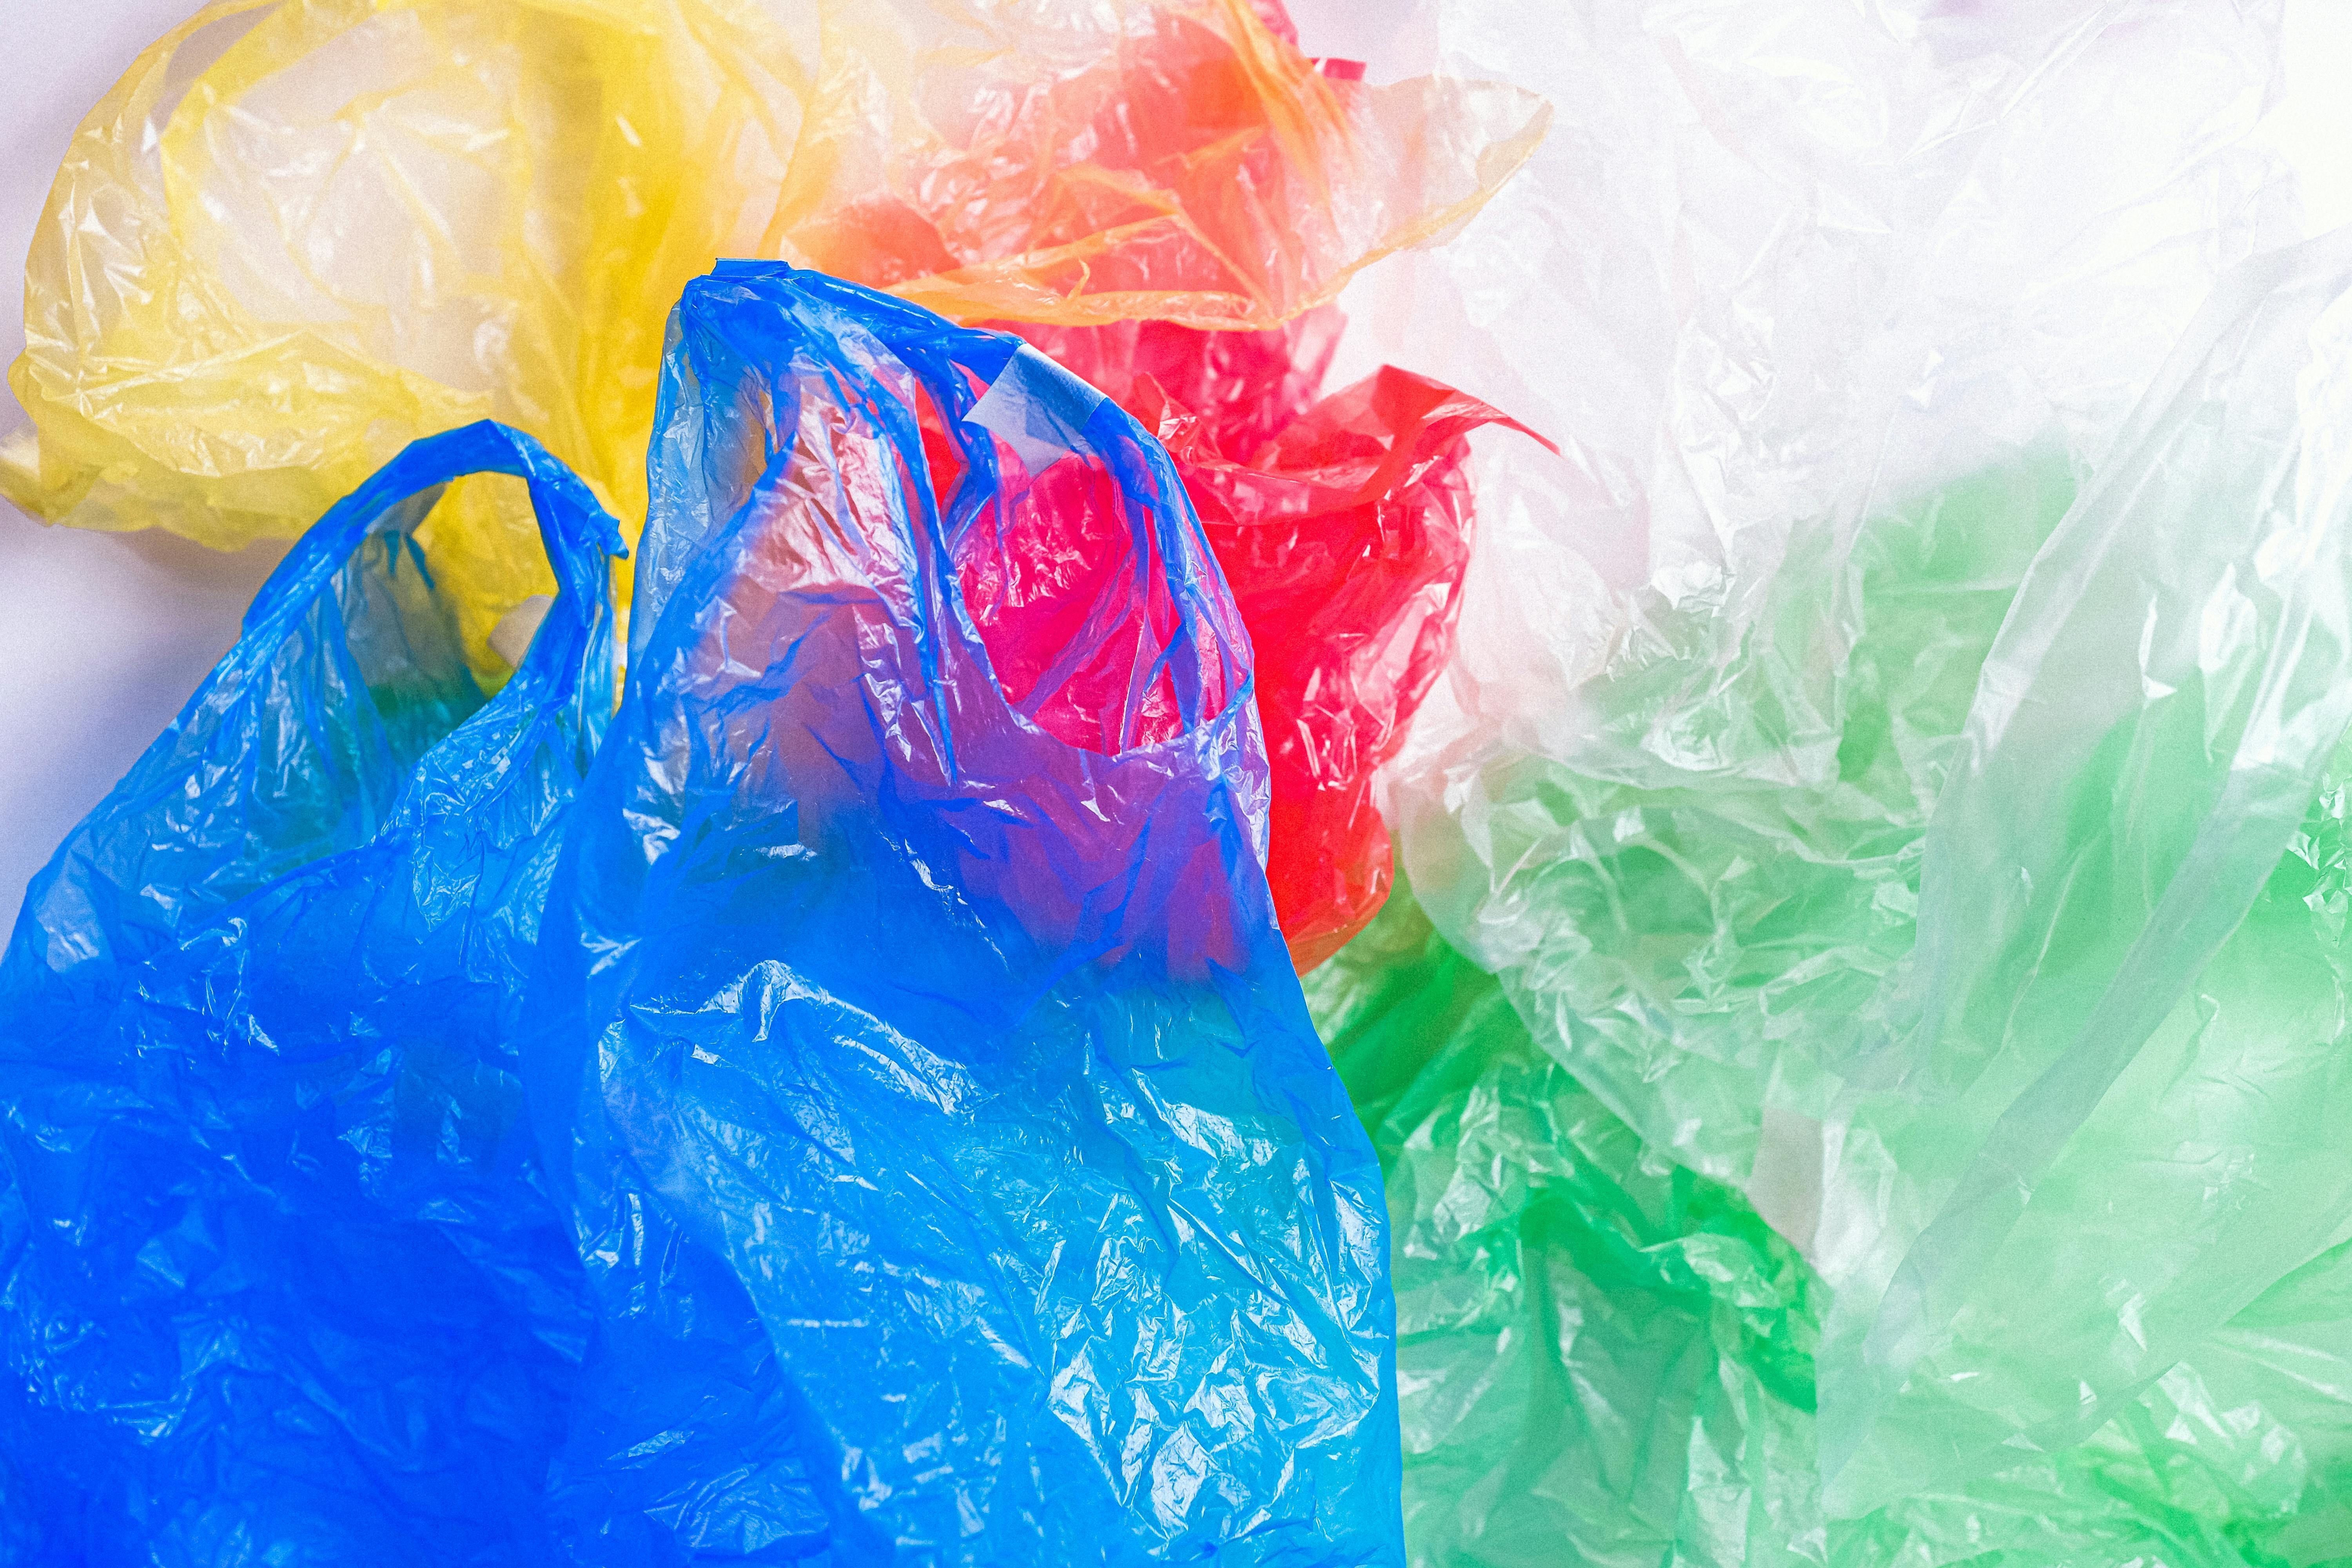 Plastic Bag Recycling in Massachusetts: What's Really Happening?